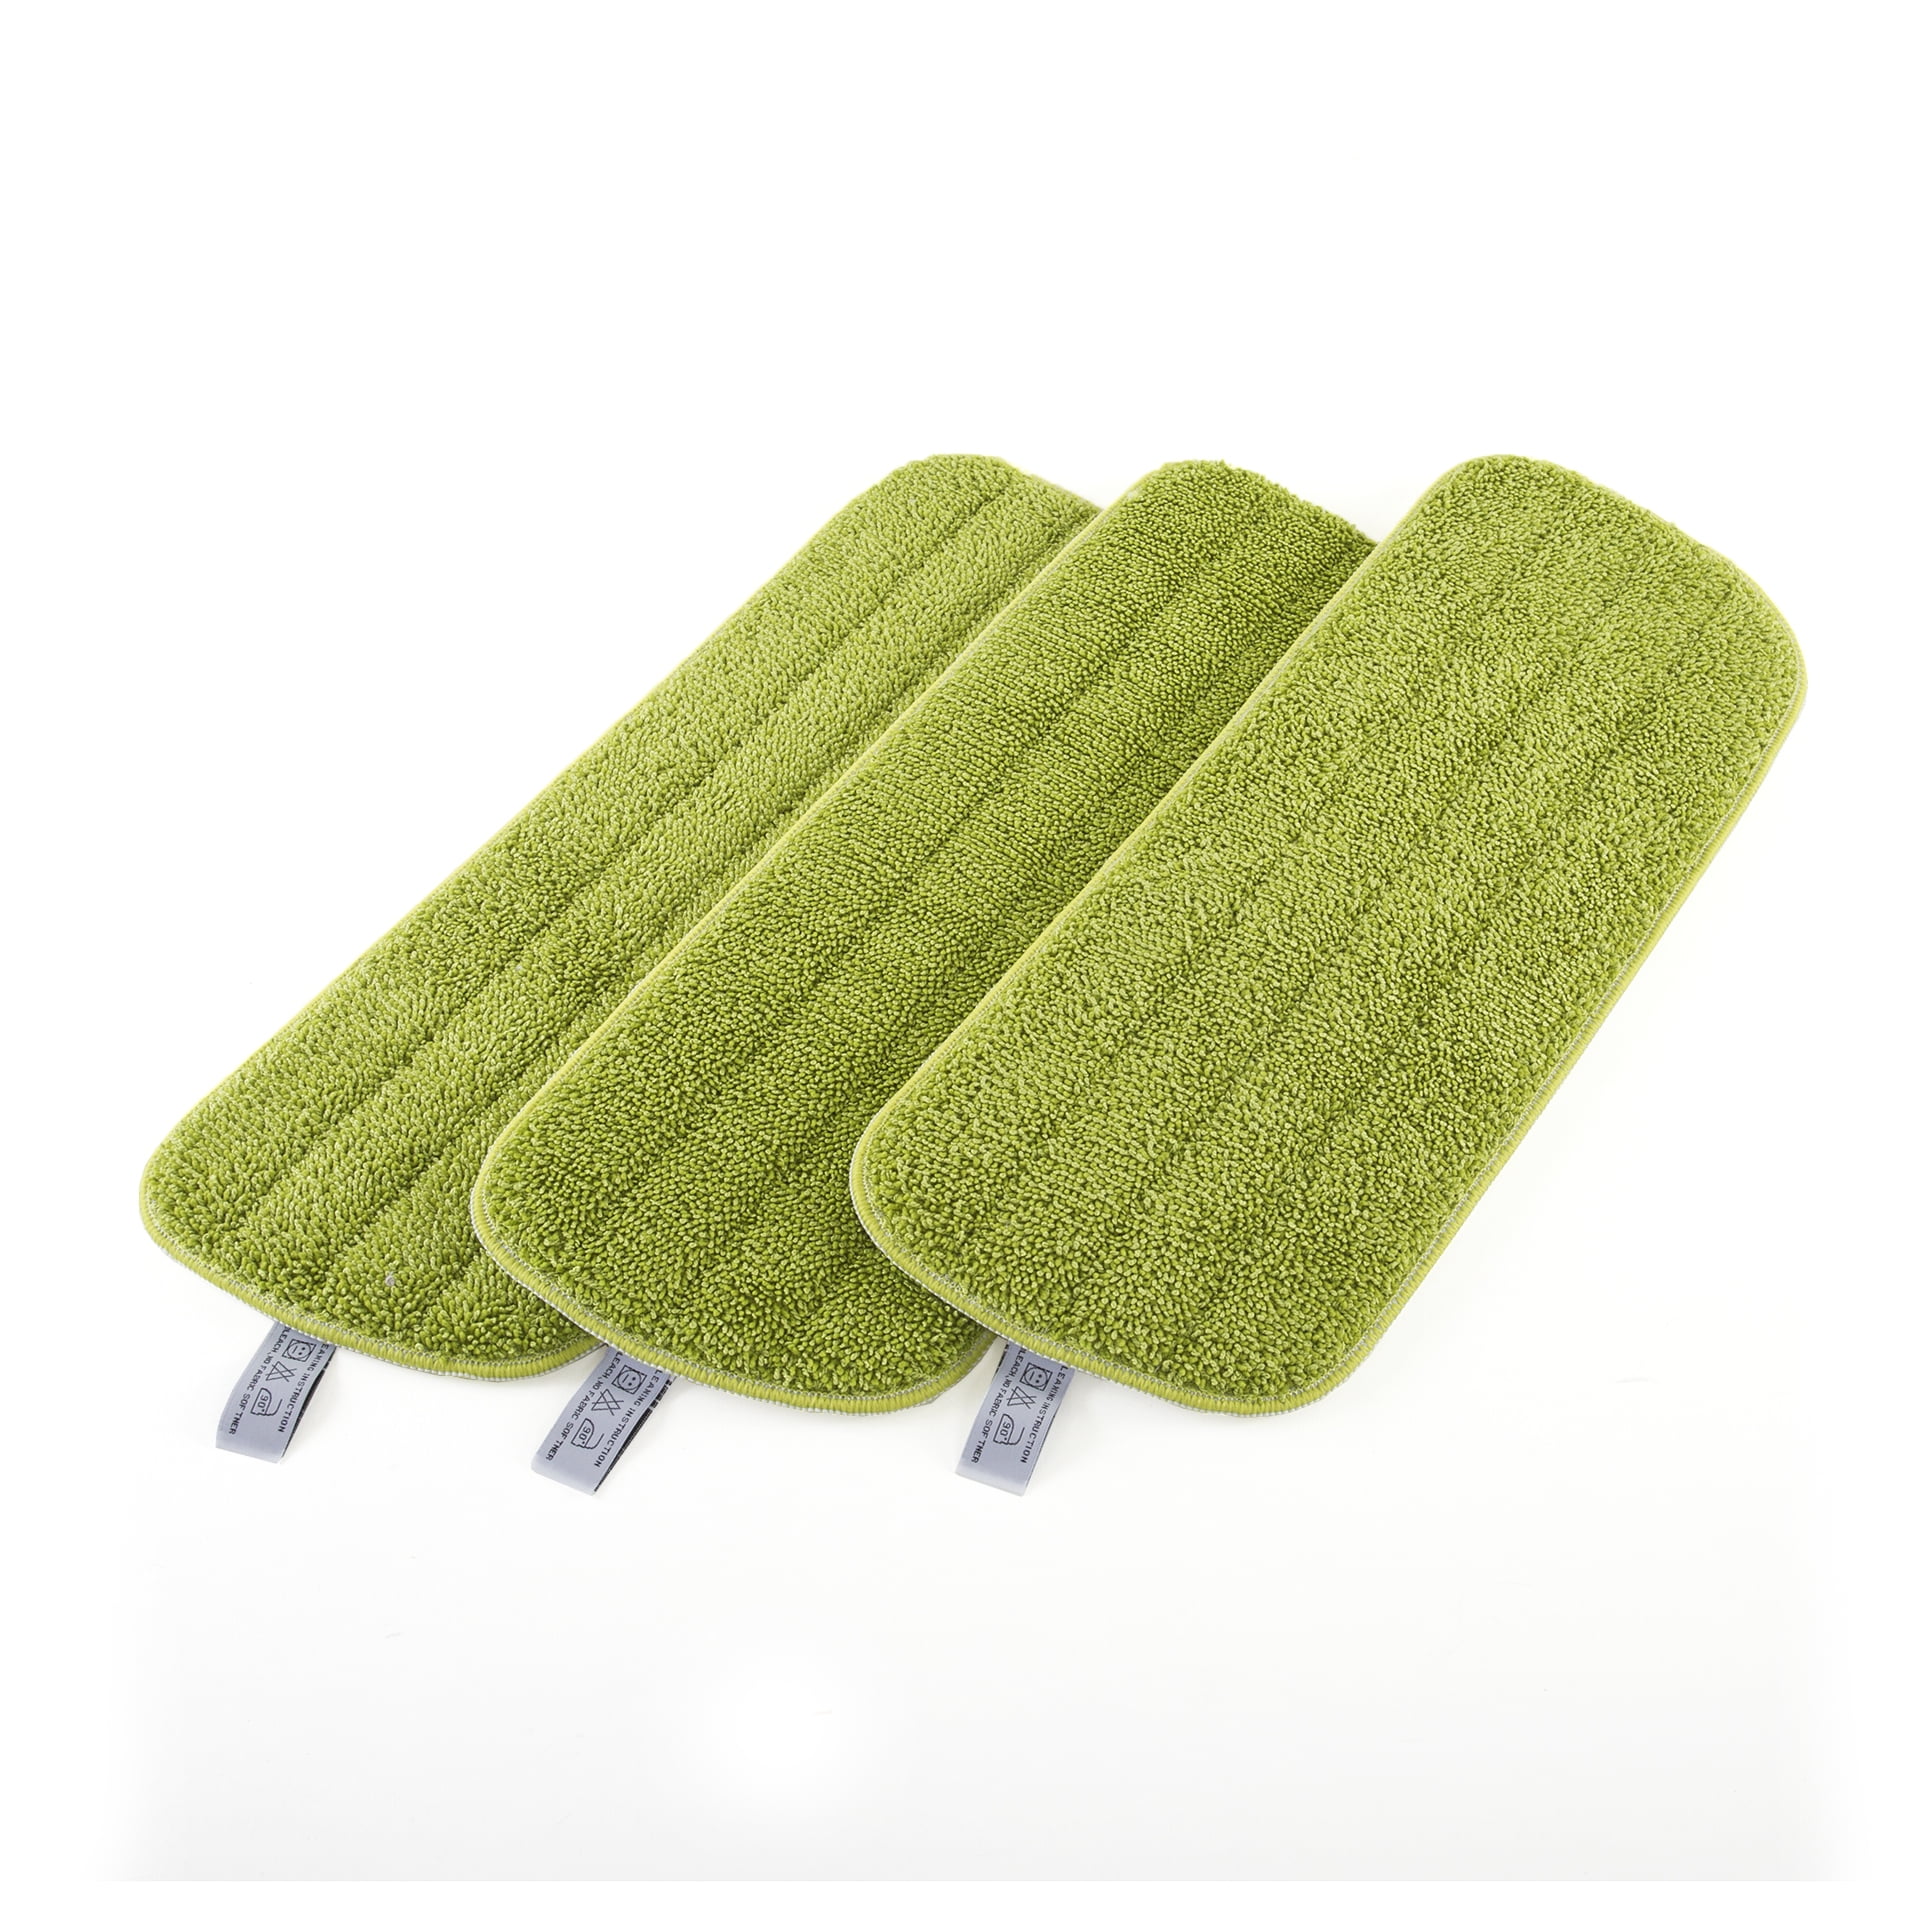 2 x Microfibre Mop Heads Refill Replacement Cloth Dust Cleaning Pad Washable 